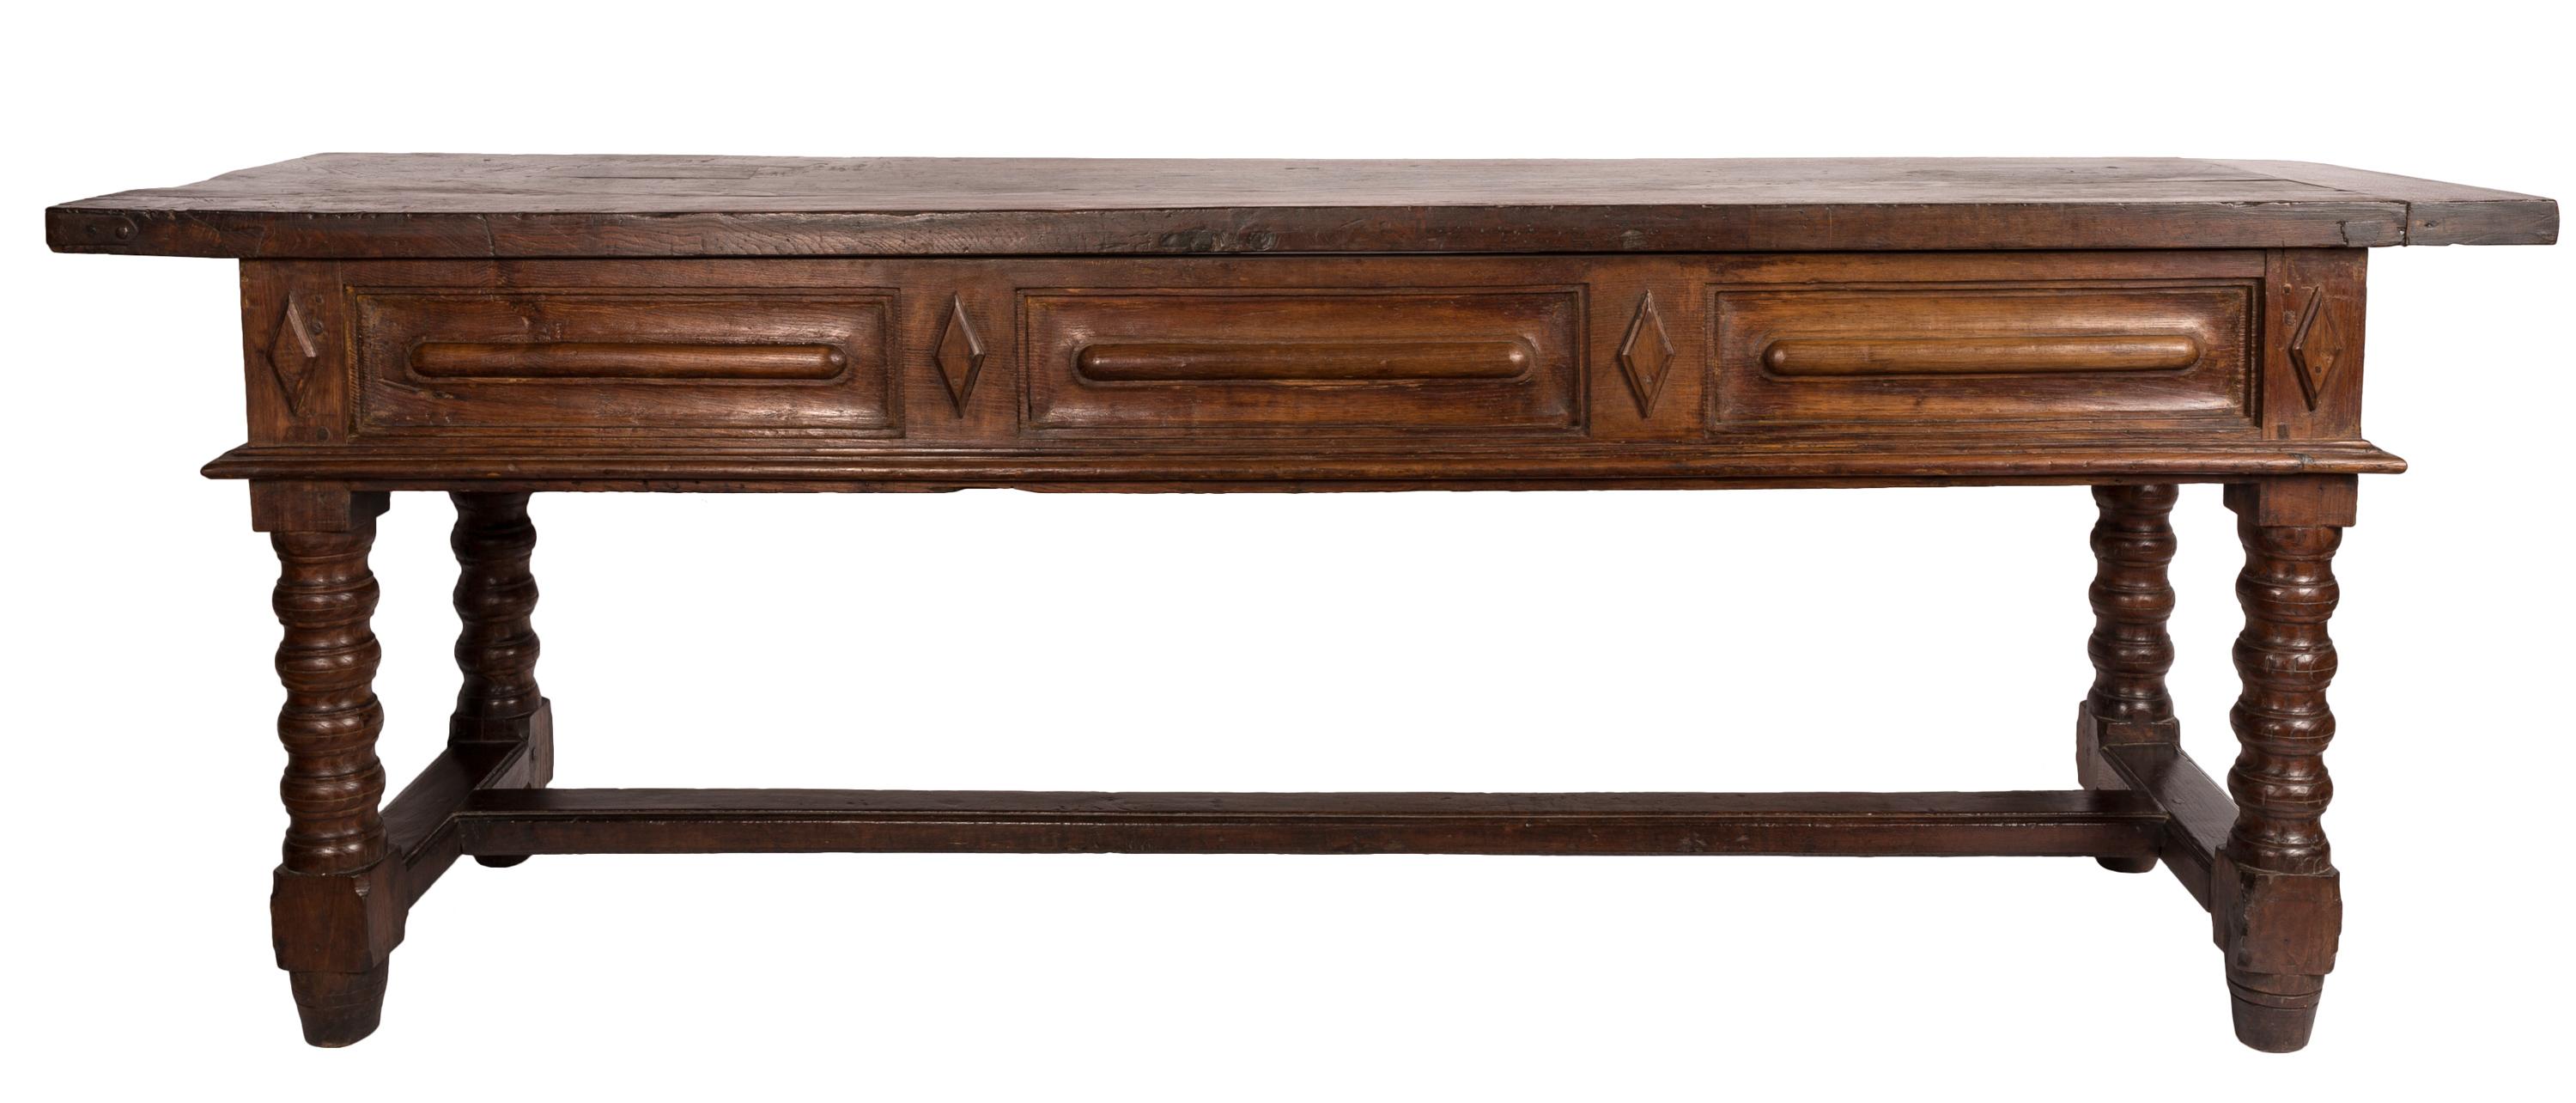 At over 2 meters (7 feet + ) long, this 18th century Spanish refectory table is a dramatic and impressive piece of history. These long and relatively narrow refectory tables were originally used in the dining halls (refectories) of medieval